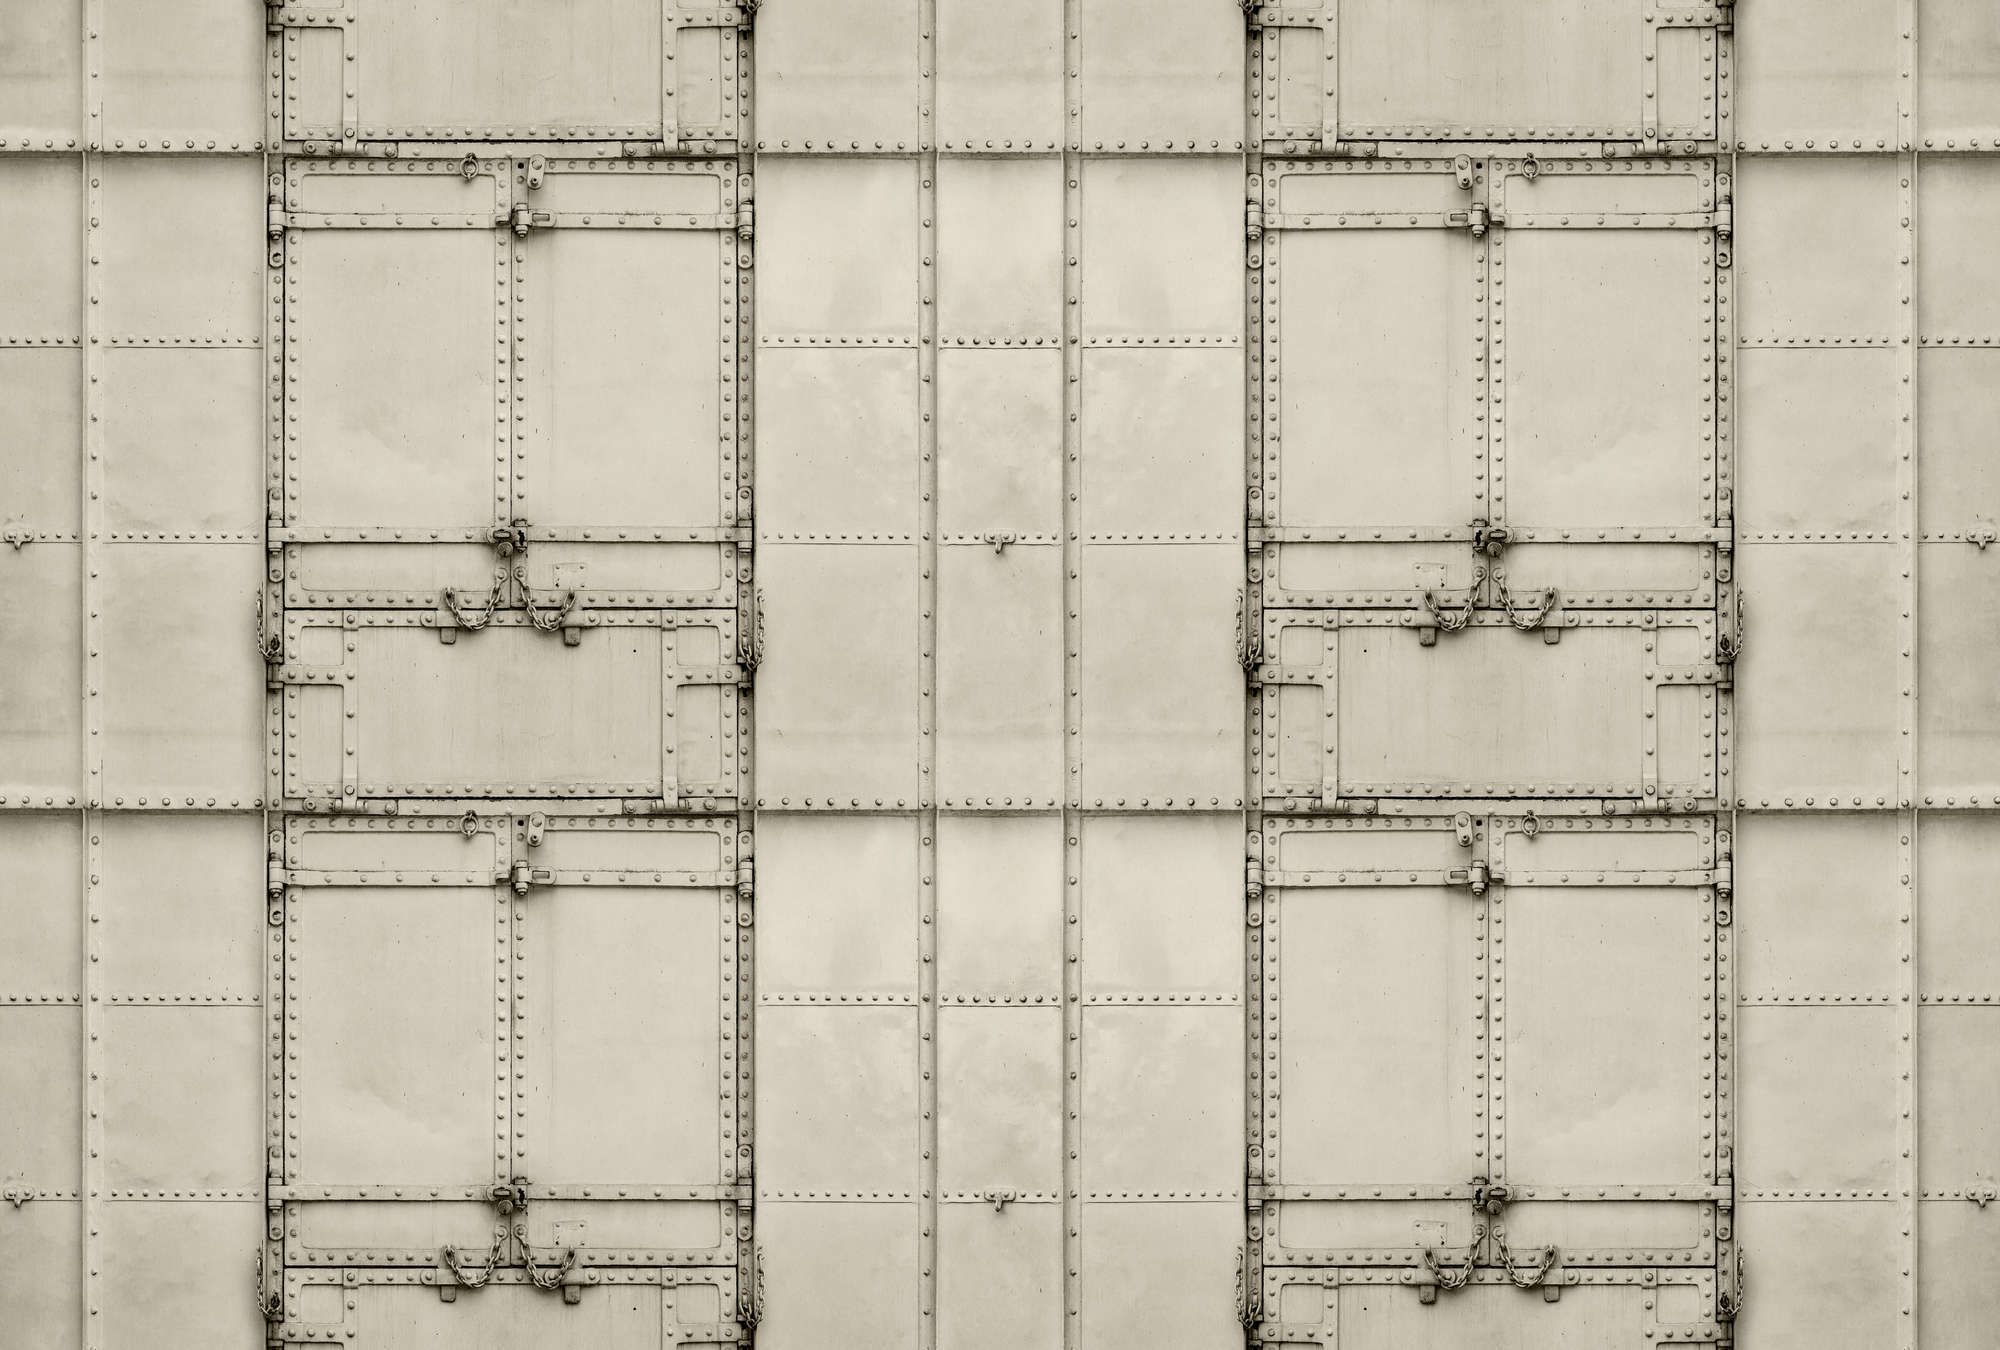             Photo wallpaper »madurai« - Patchwork design with metal plates with rivets & chains - Matt, smooth non-woven fabric
        